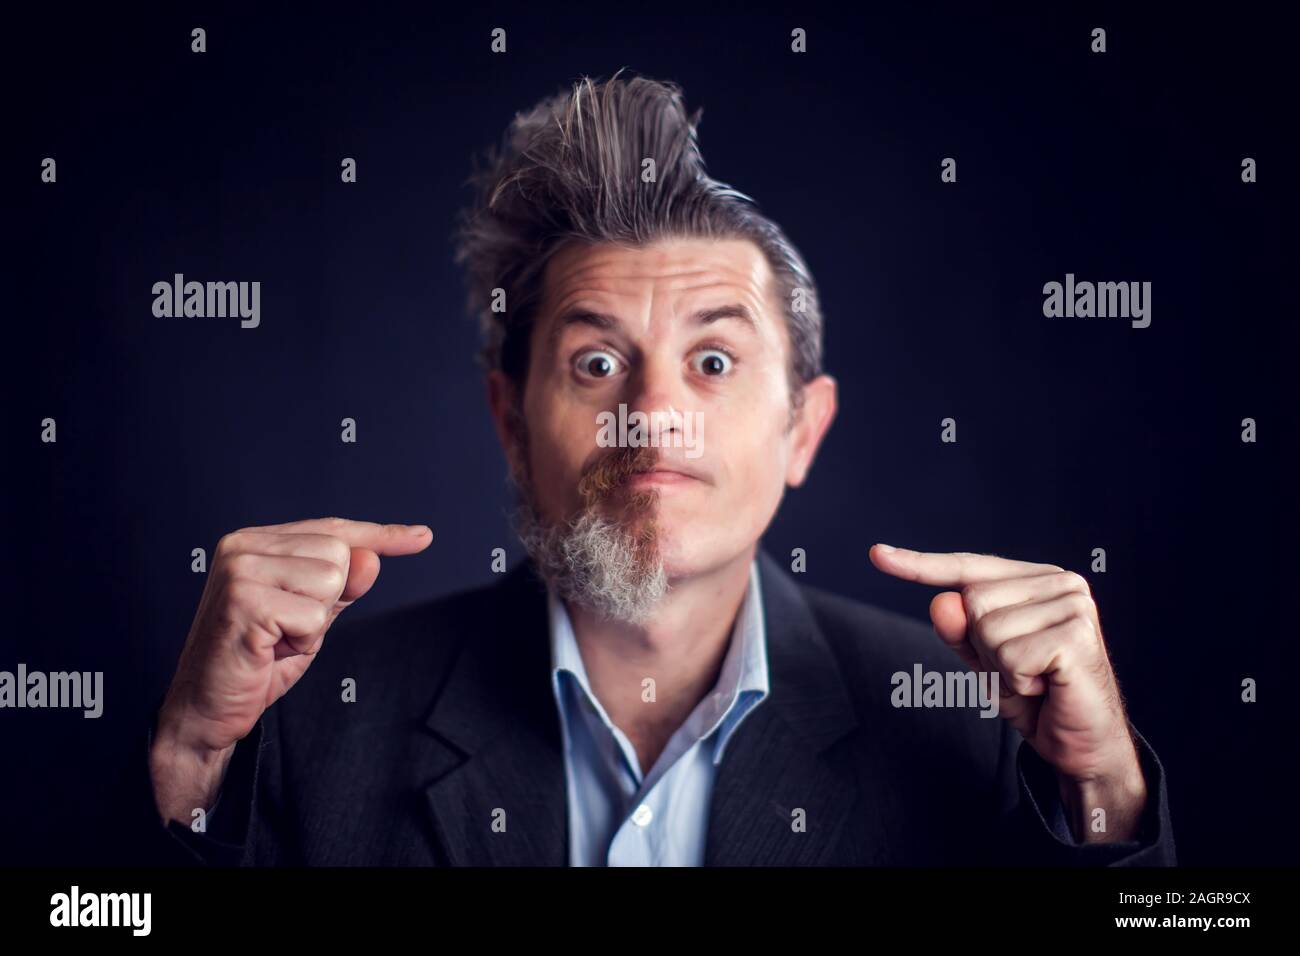 Half bearded funny man wearing suit in front of black background. People and skin care concept Stock Photo